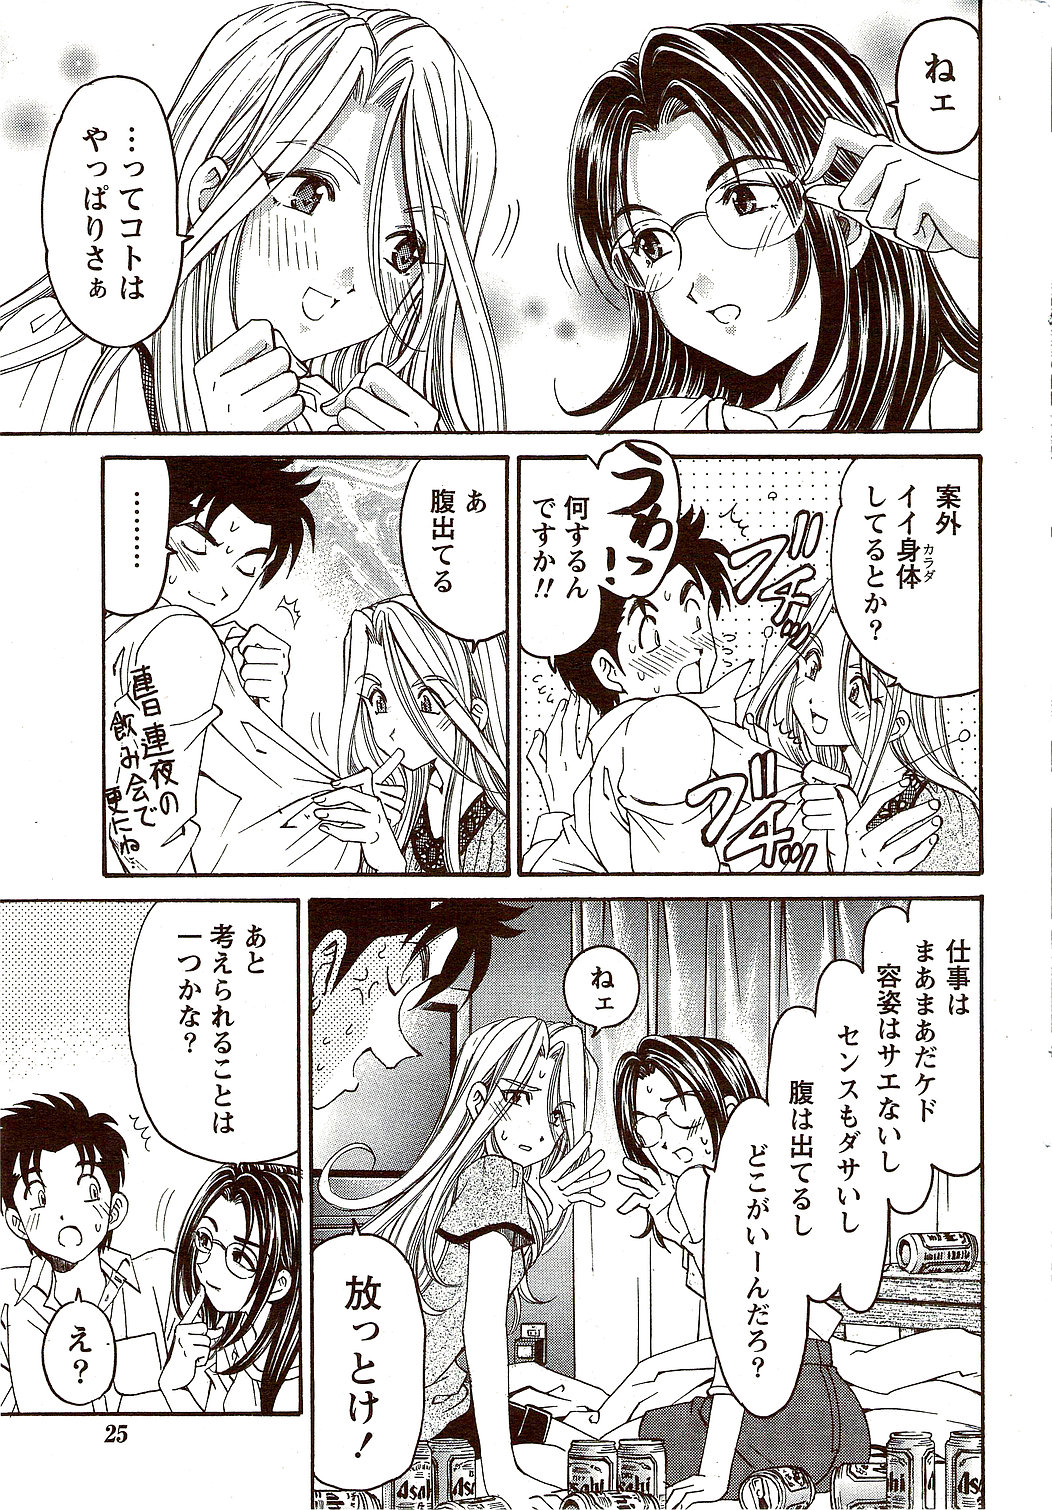 Monthly Vitaman 2009-10 page 25 full